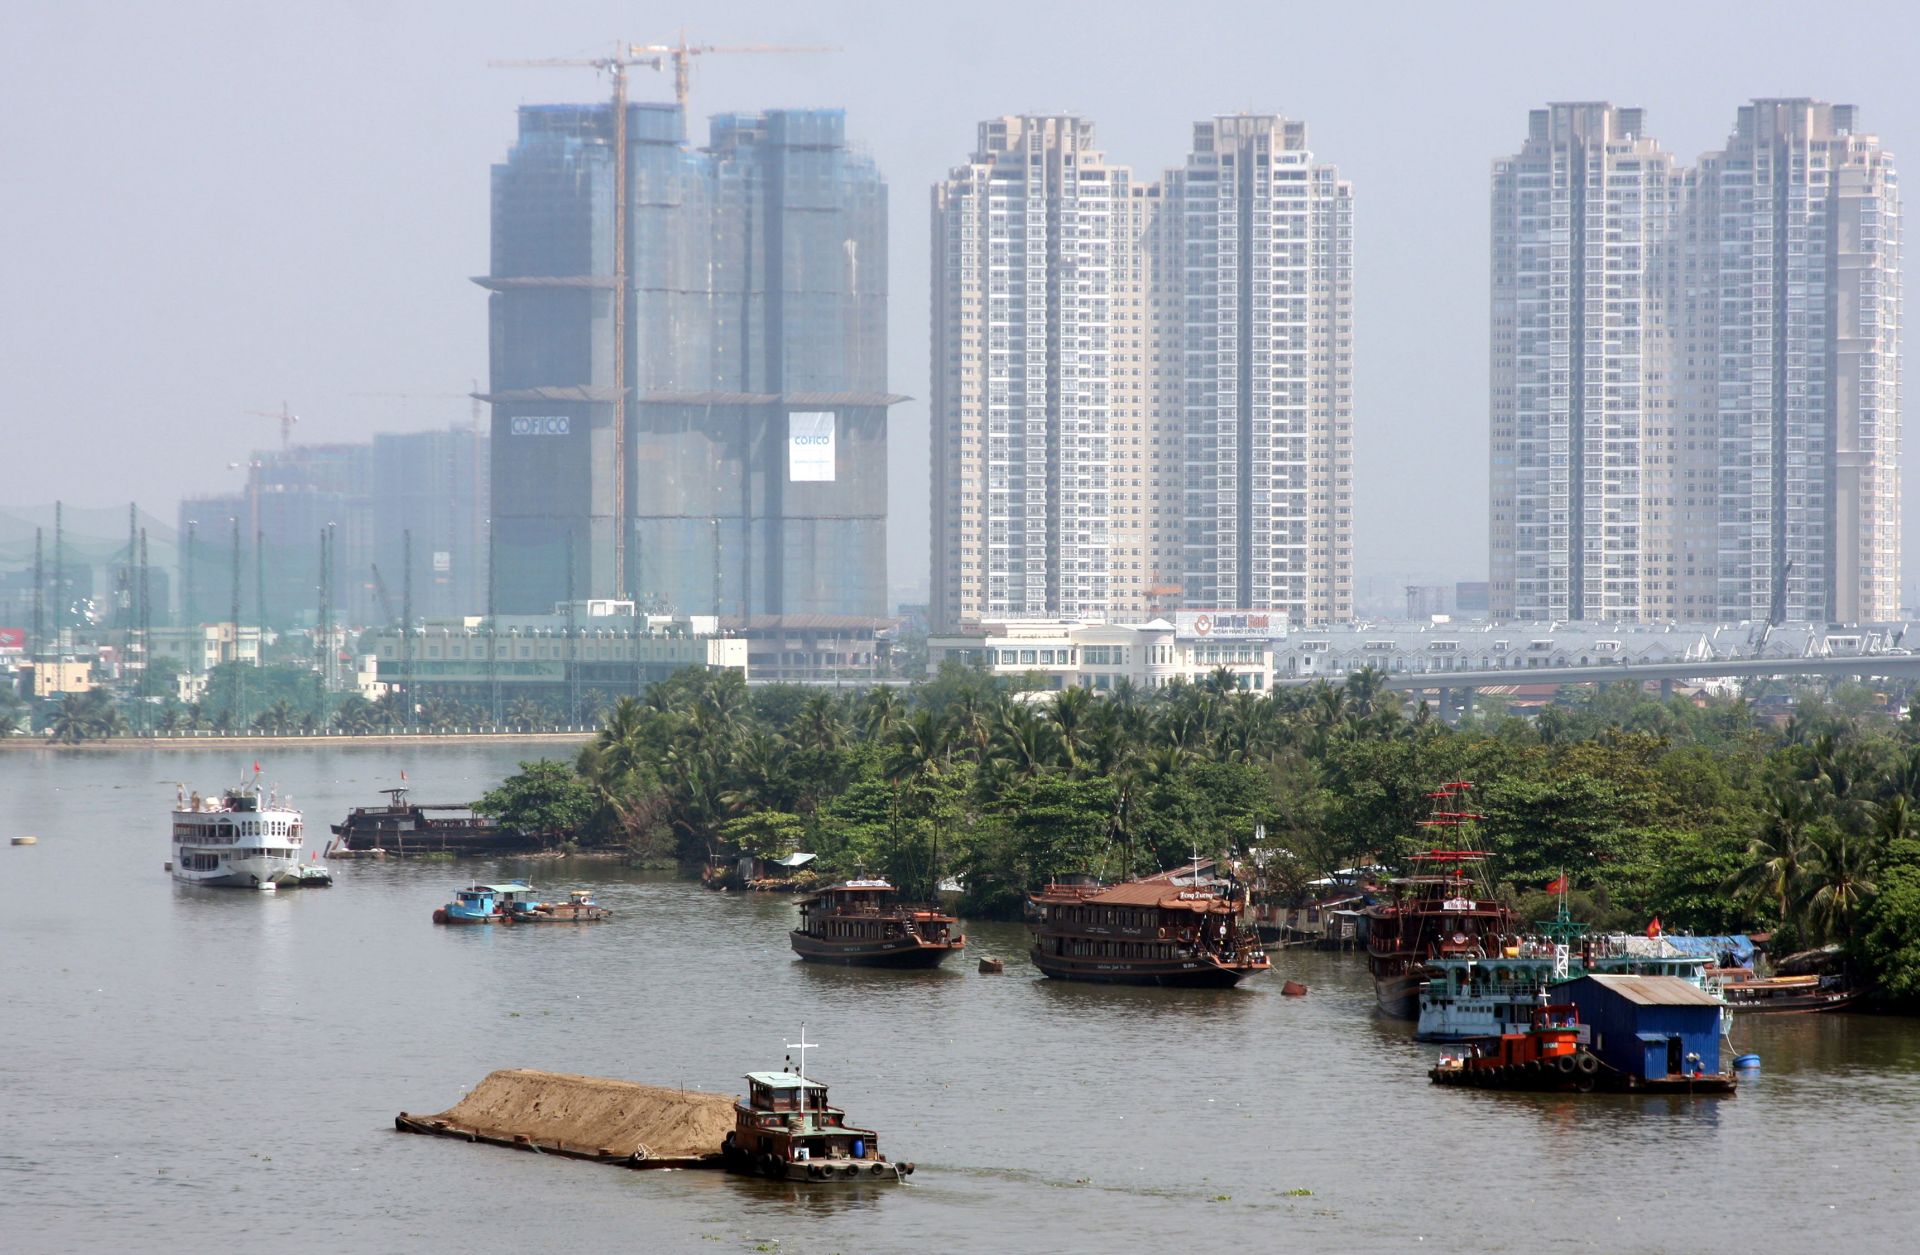 New buildings tower above boats on the Saigon river.